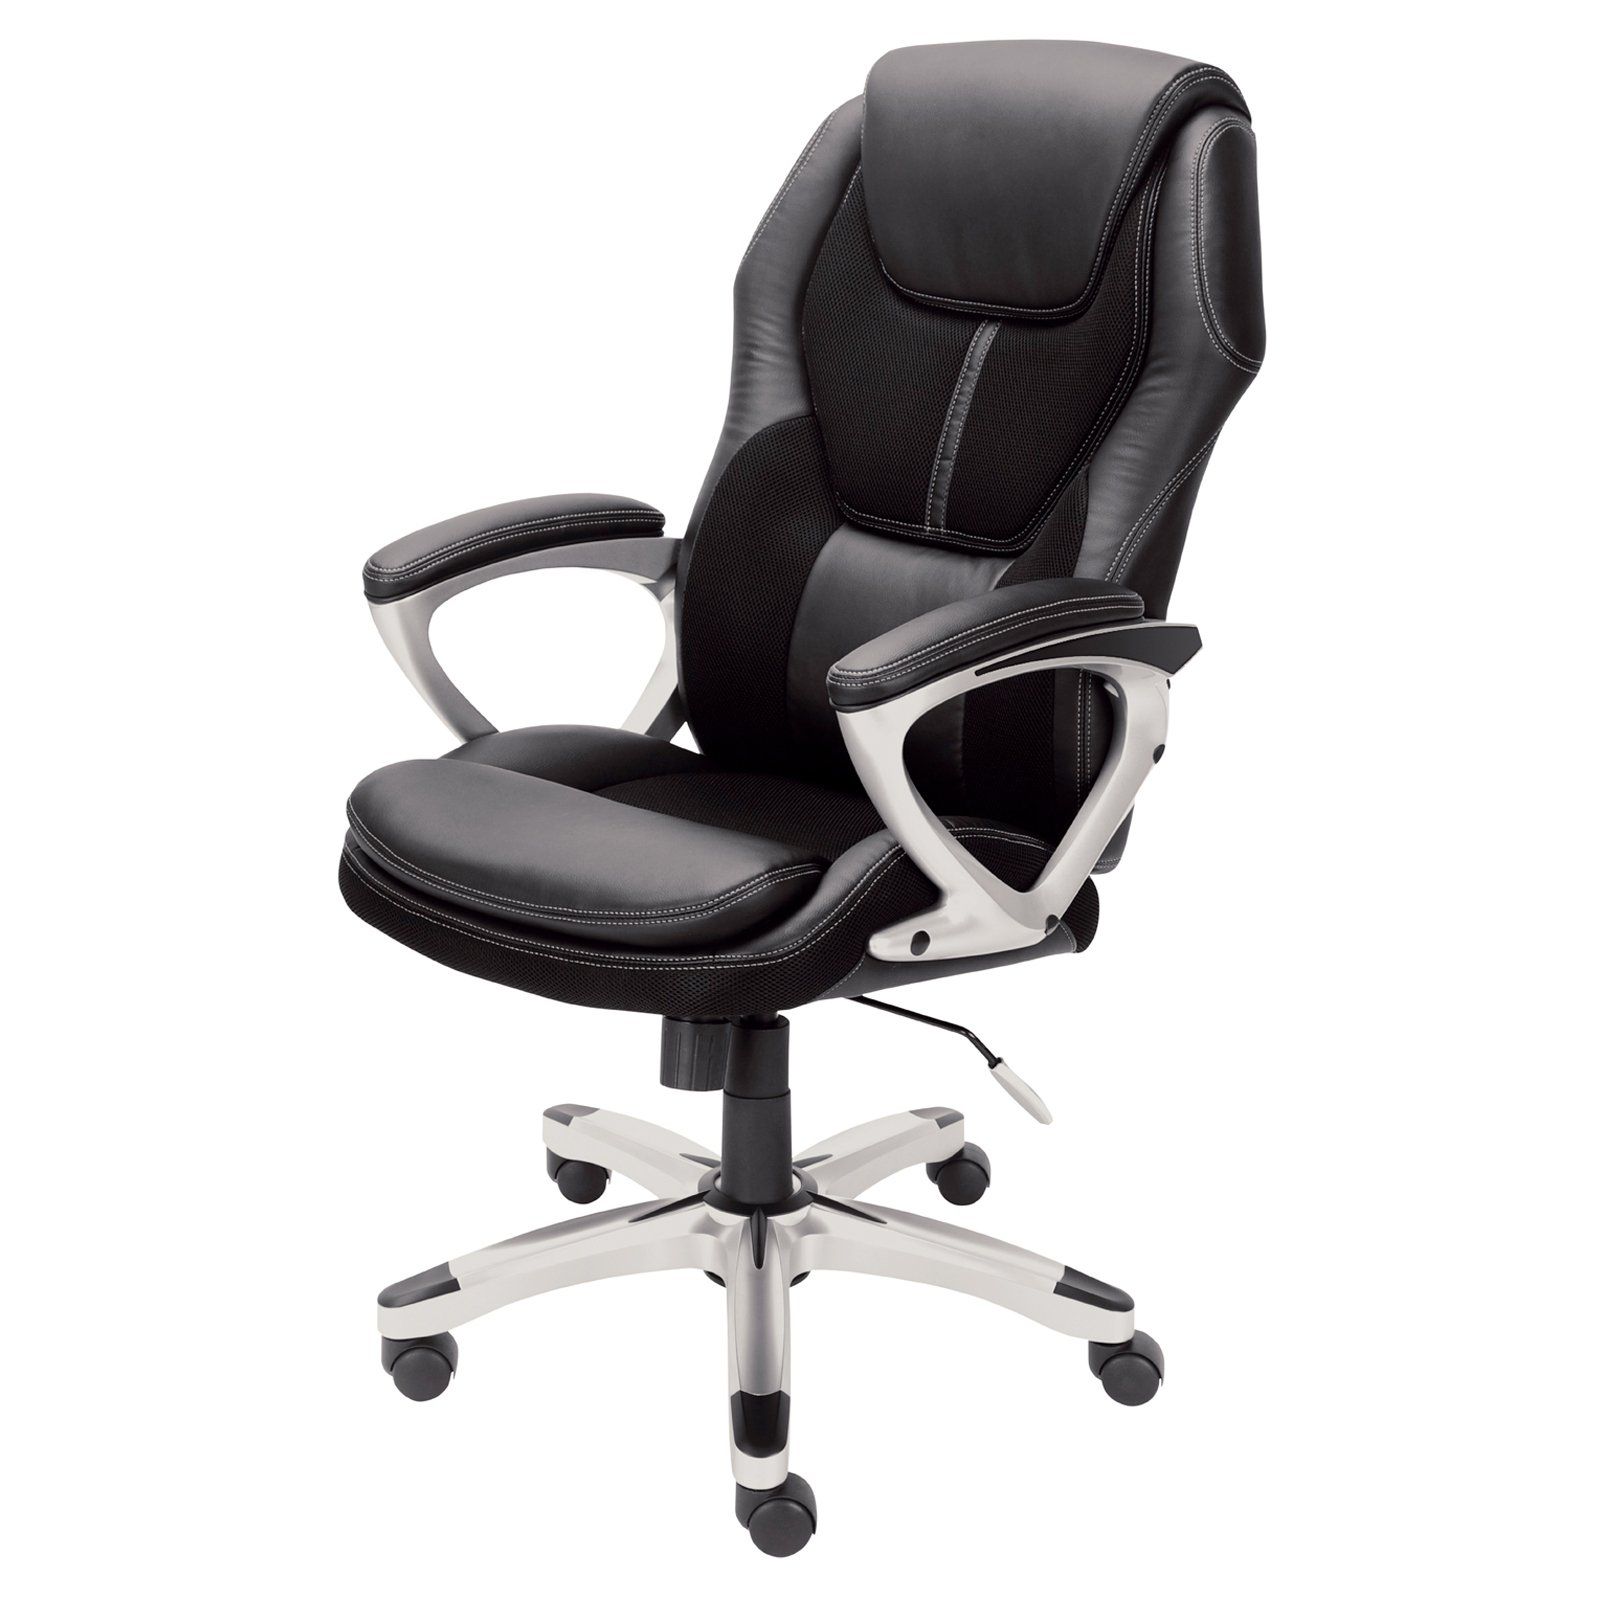 Serta Executive Office Chair, Puresoft Faux Leather With Mesh Pertaining To Well Known Premium Executive Office Chairs (View 13 of 20)